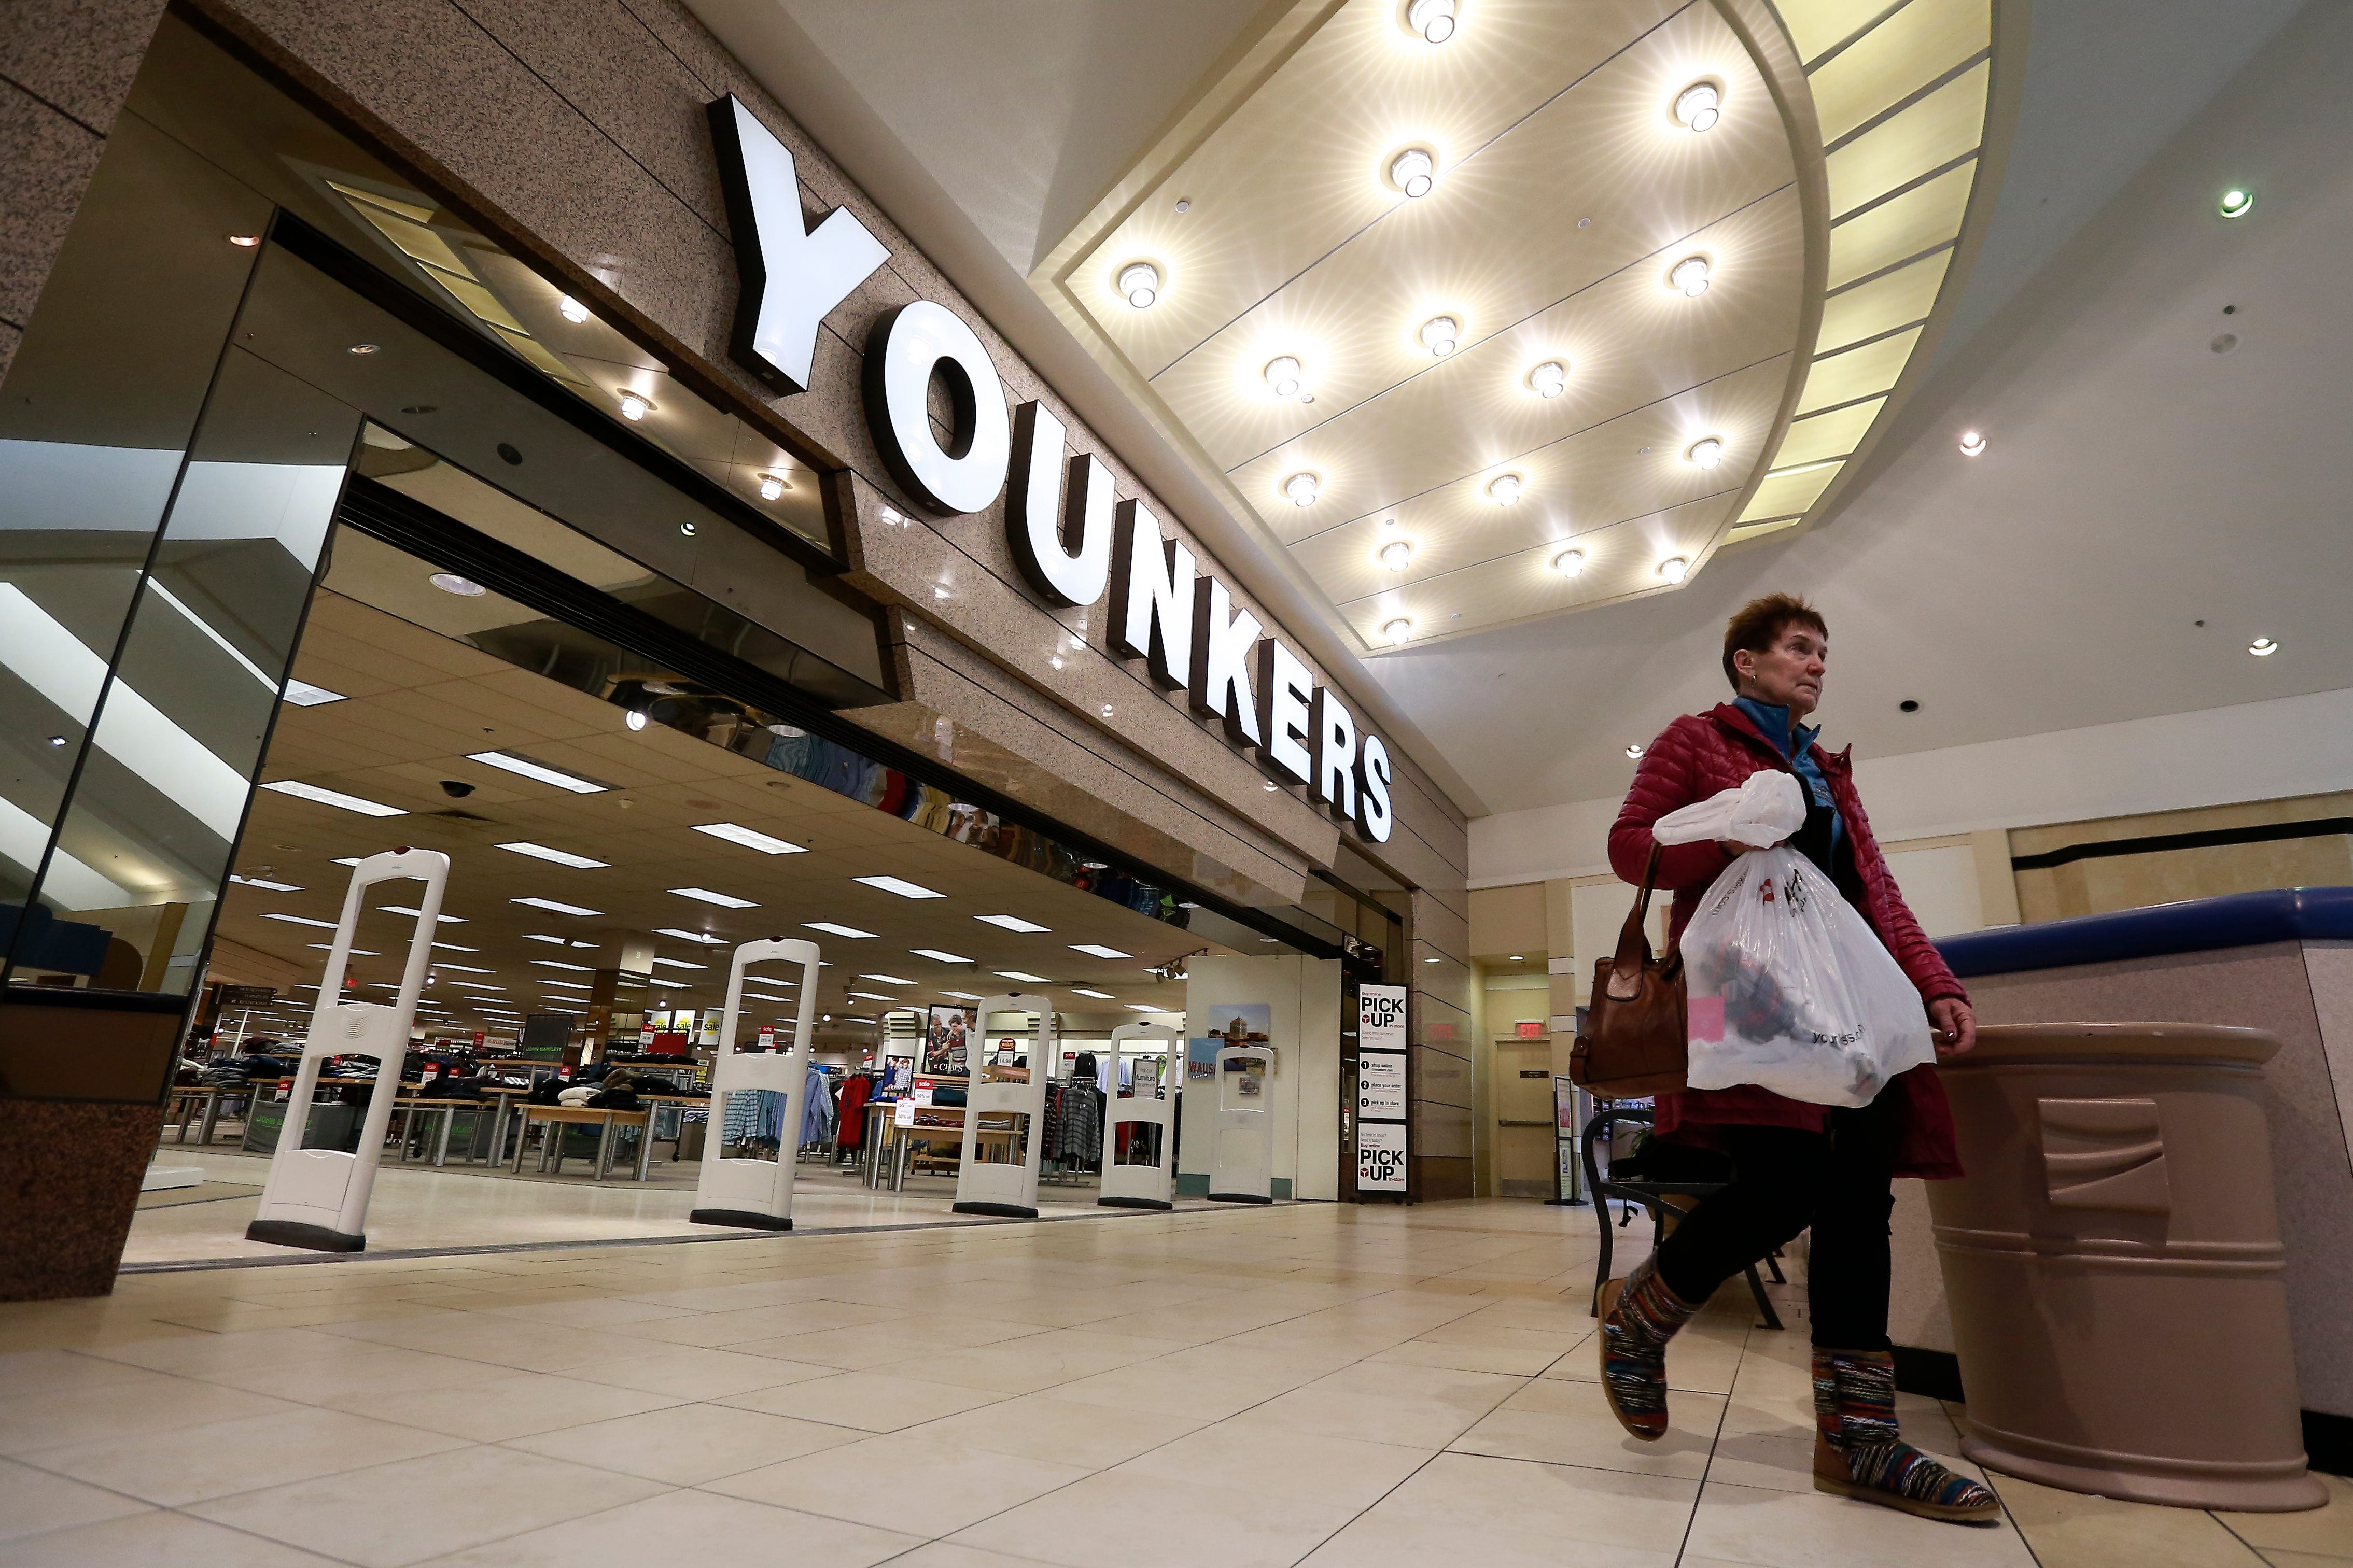 A shopper leaves Younkers store Wednesday, Jan. 31, 2018, in the Wausau Center mall in Wausau, Wis.